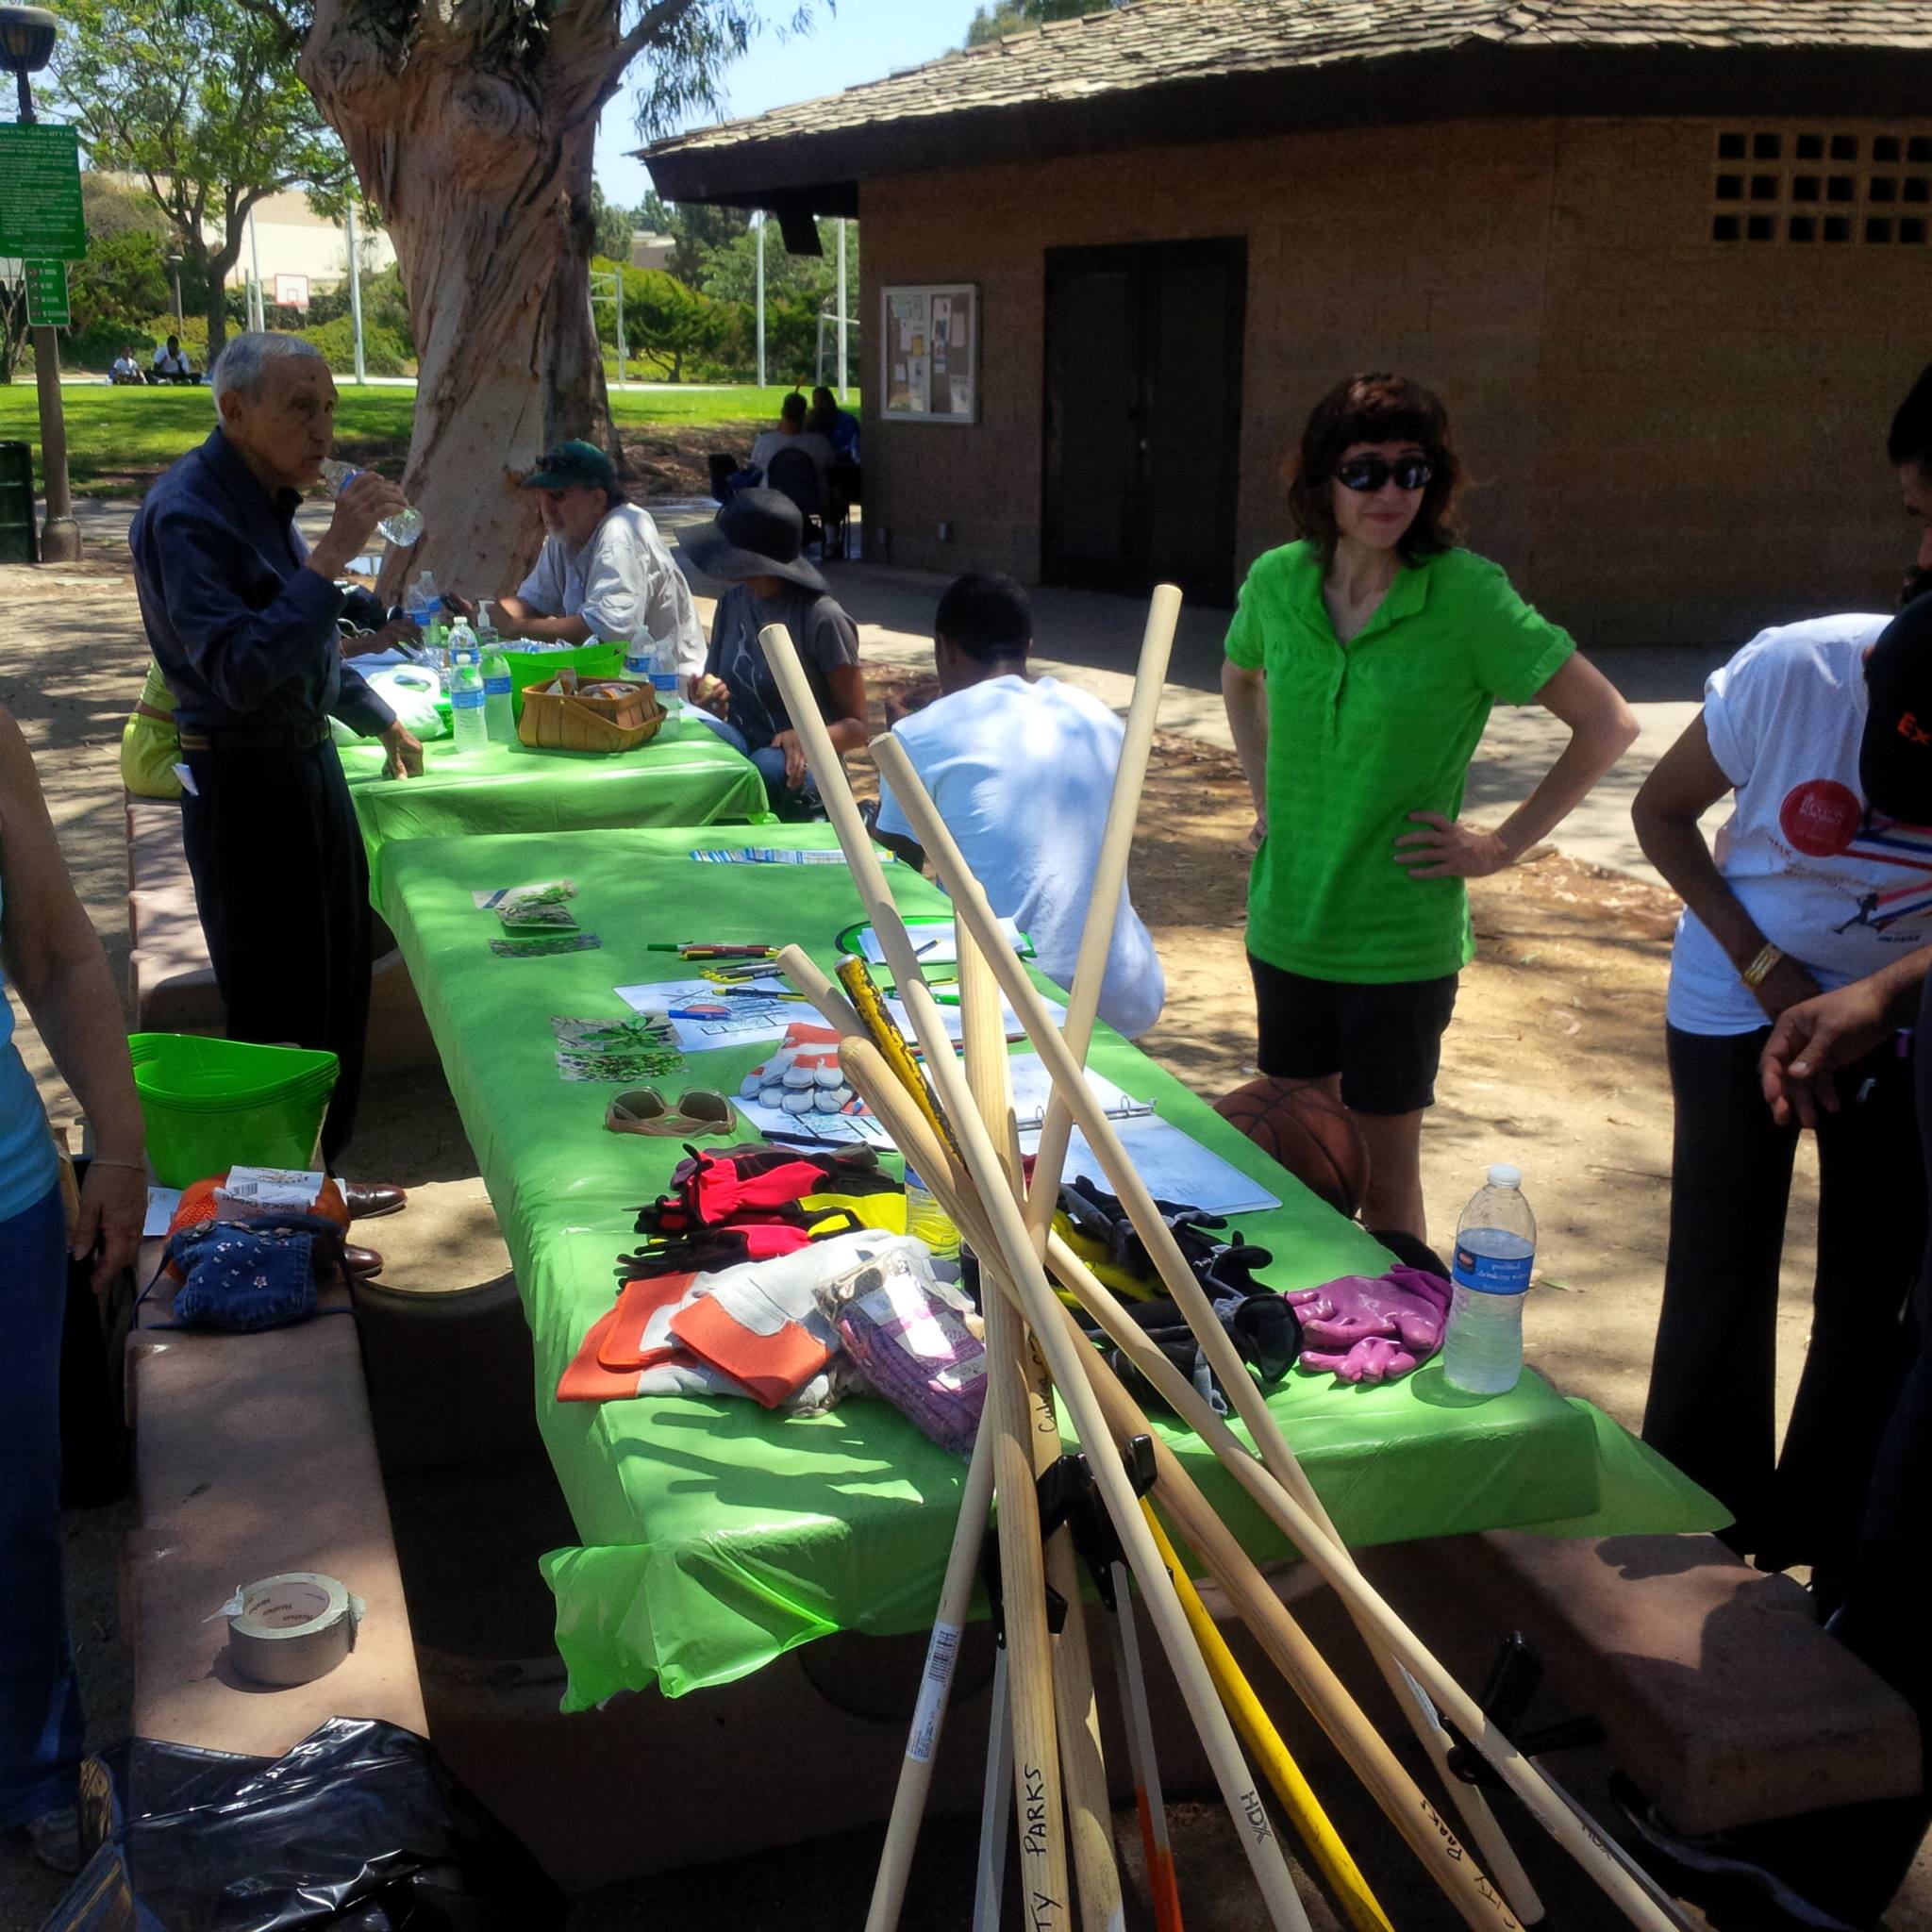 2014 Annual Fox Hills Park Cleanup Day